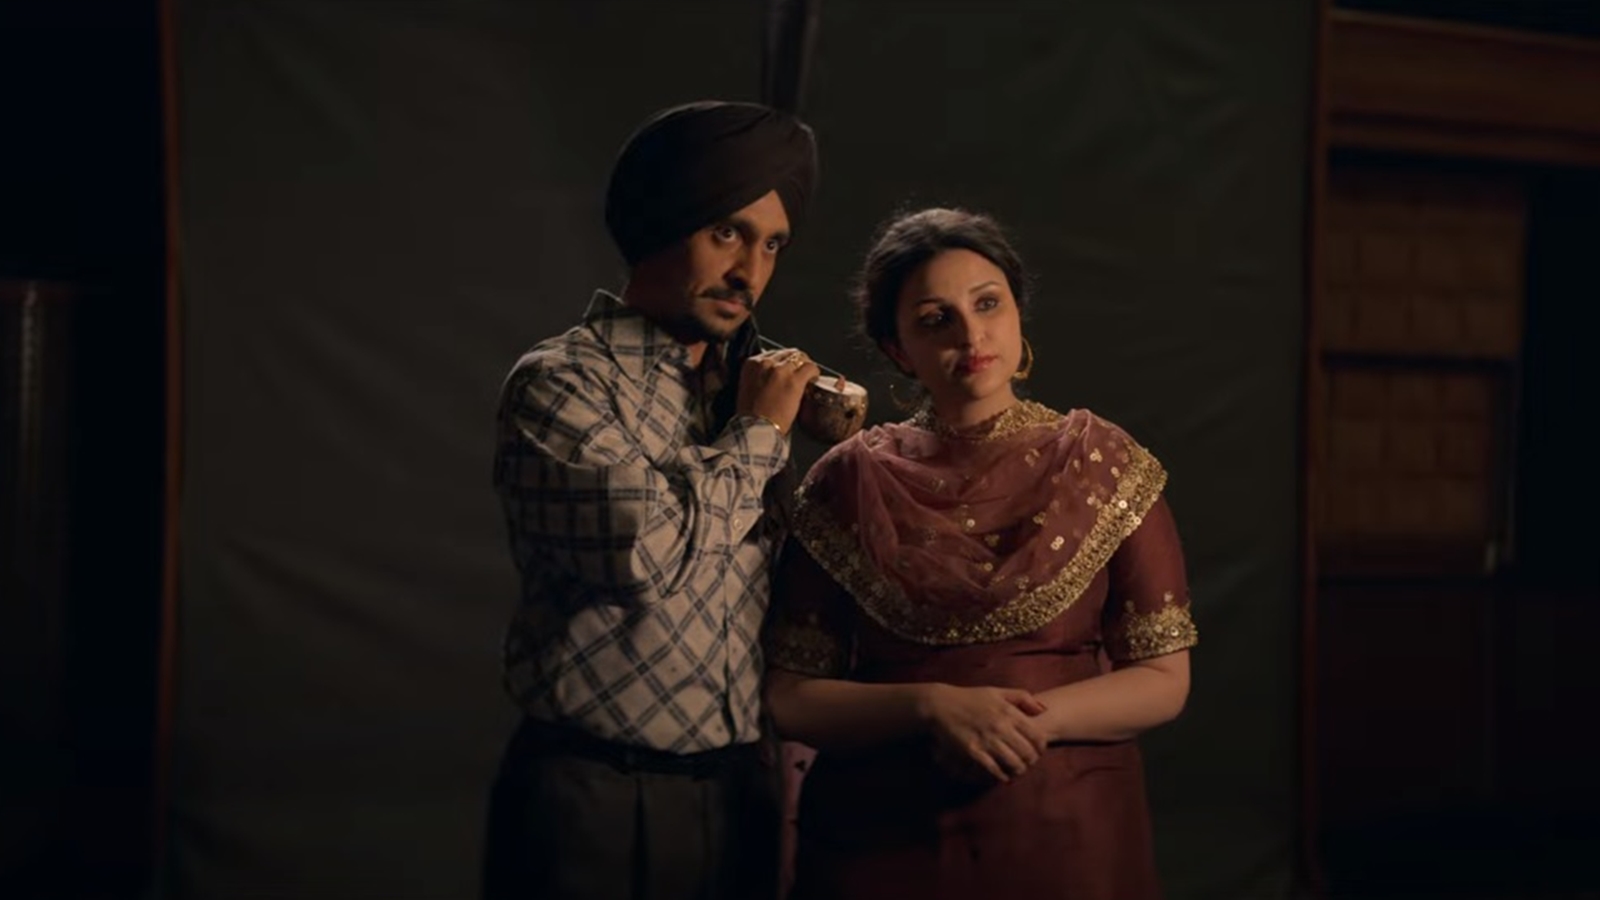 android, chamkila trailer: diljit dosanjh plays the ‘highest record selling artiste of punjab’, who was gunned down in his prime